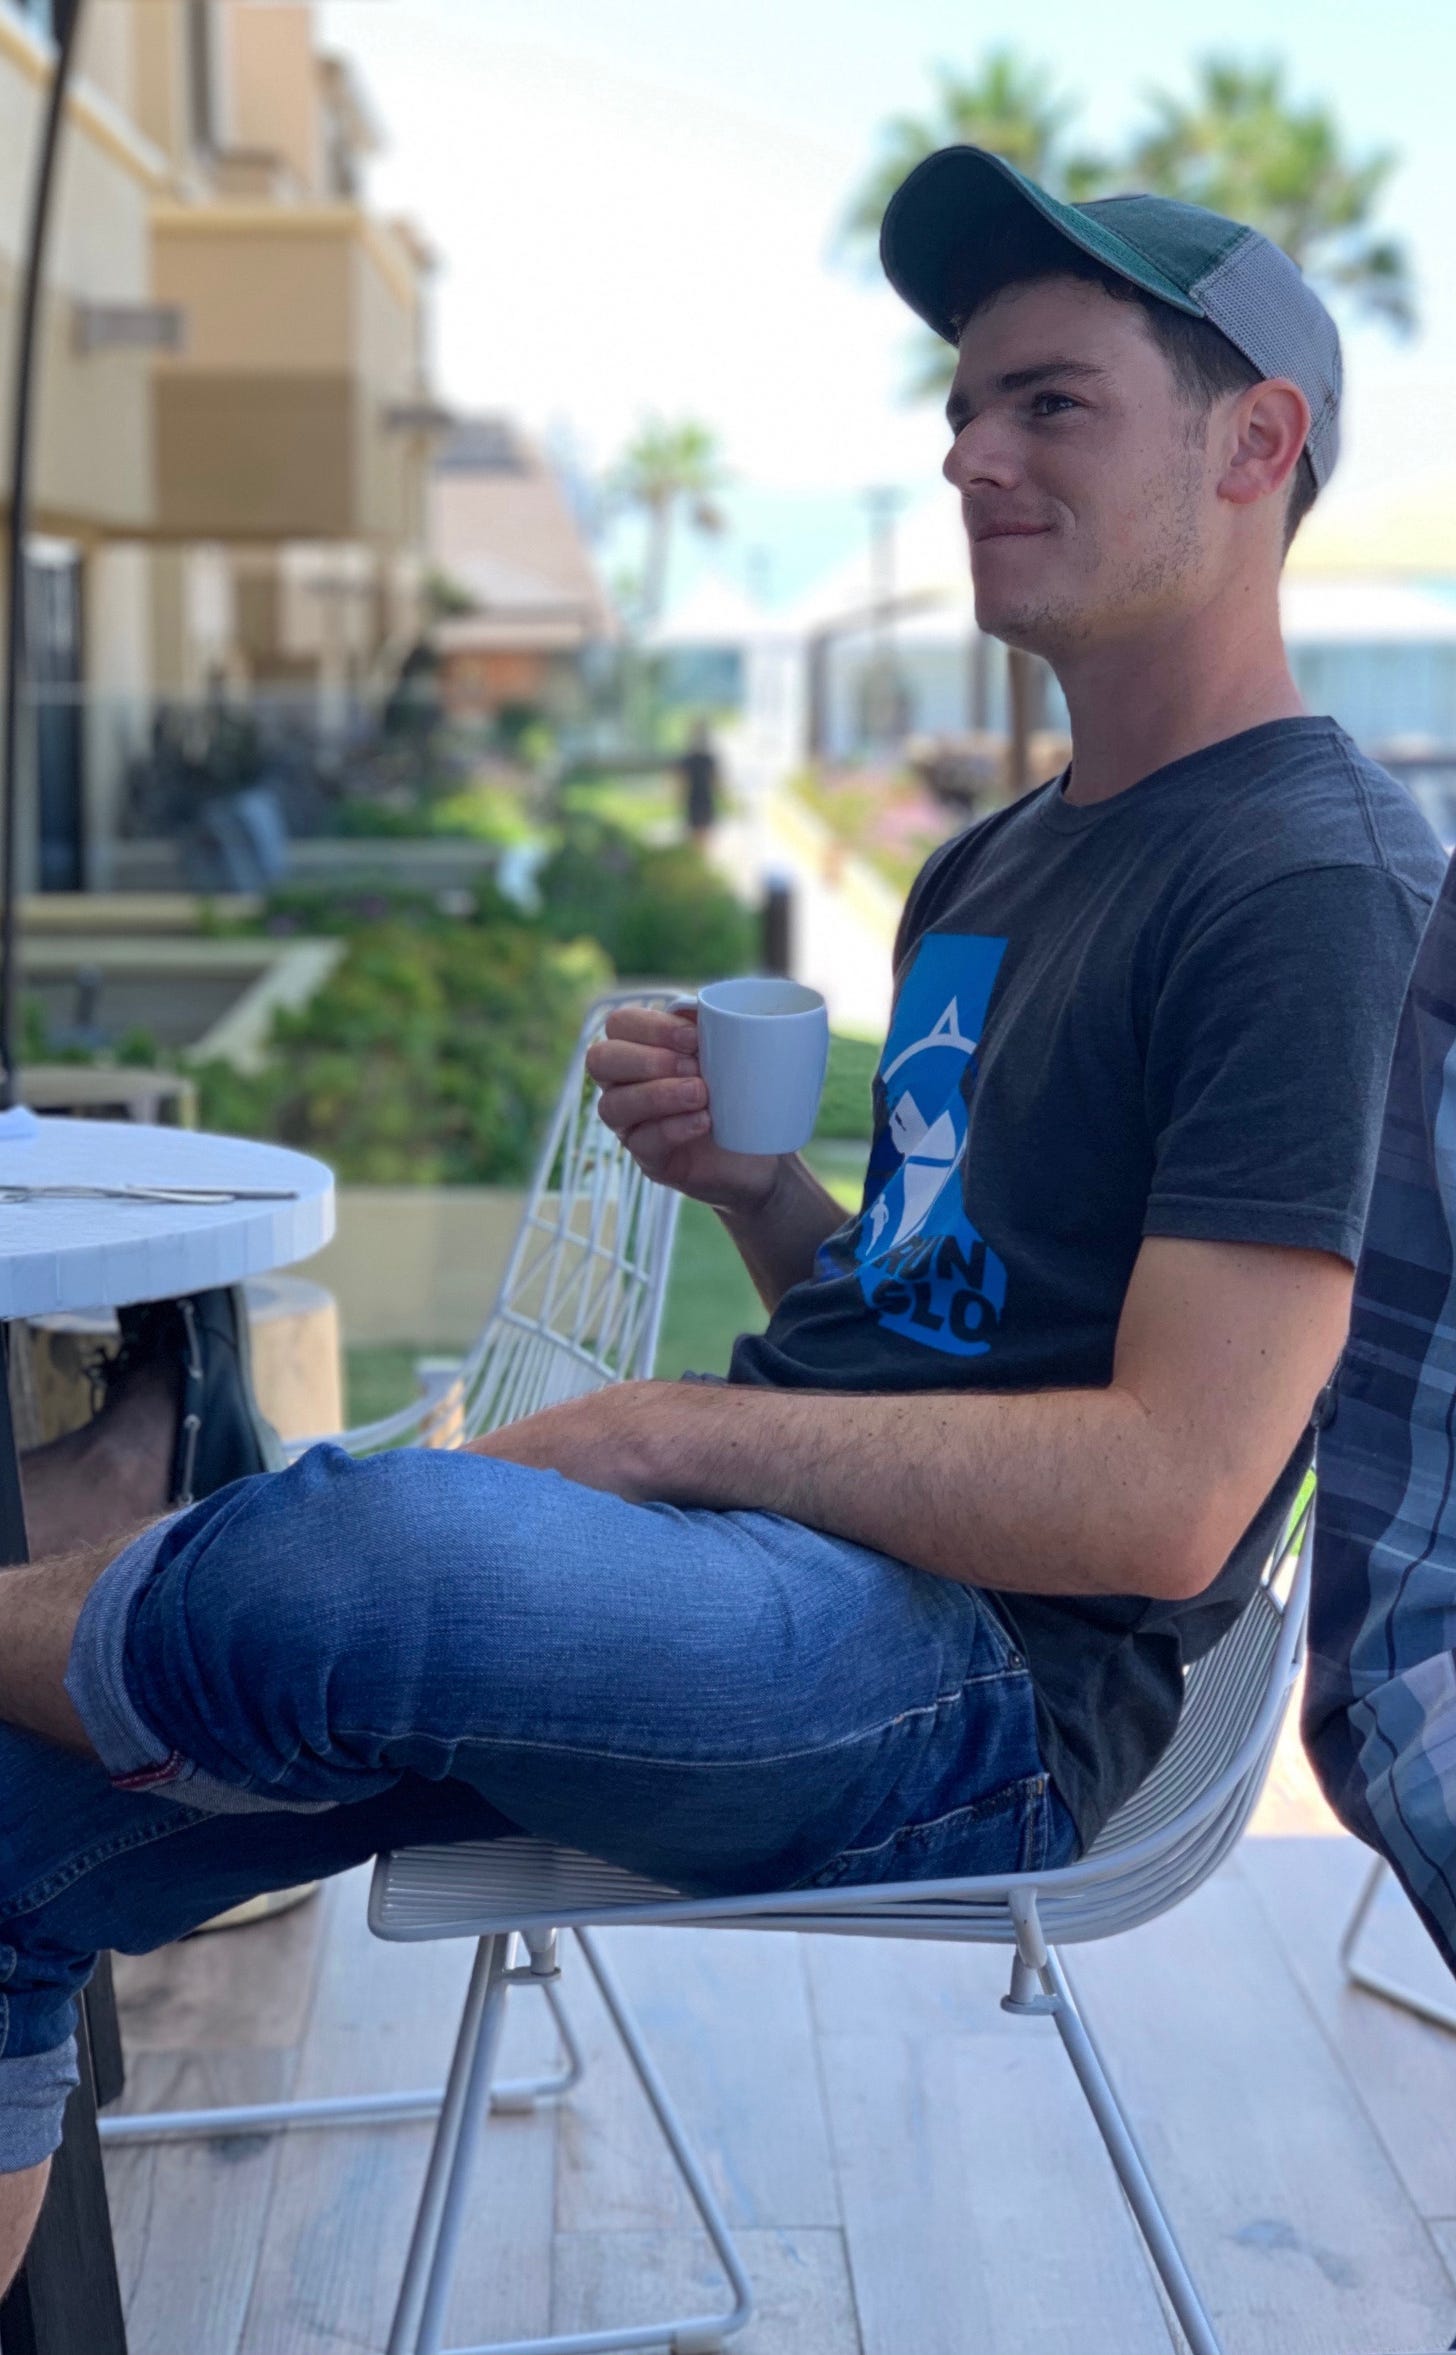 Profile photo of Brendan Abrams, a white man in a blue t-shirt, jeans and baseball cap sitting on a patio chair holding a cup of coffee while looking off into the distance. A palm tree and blue water next to a walking path is in the background.